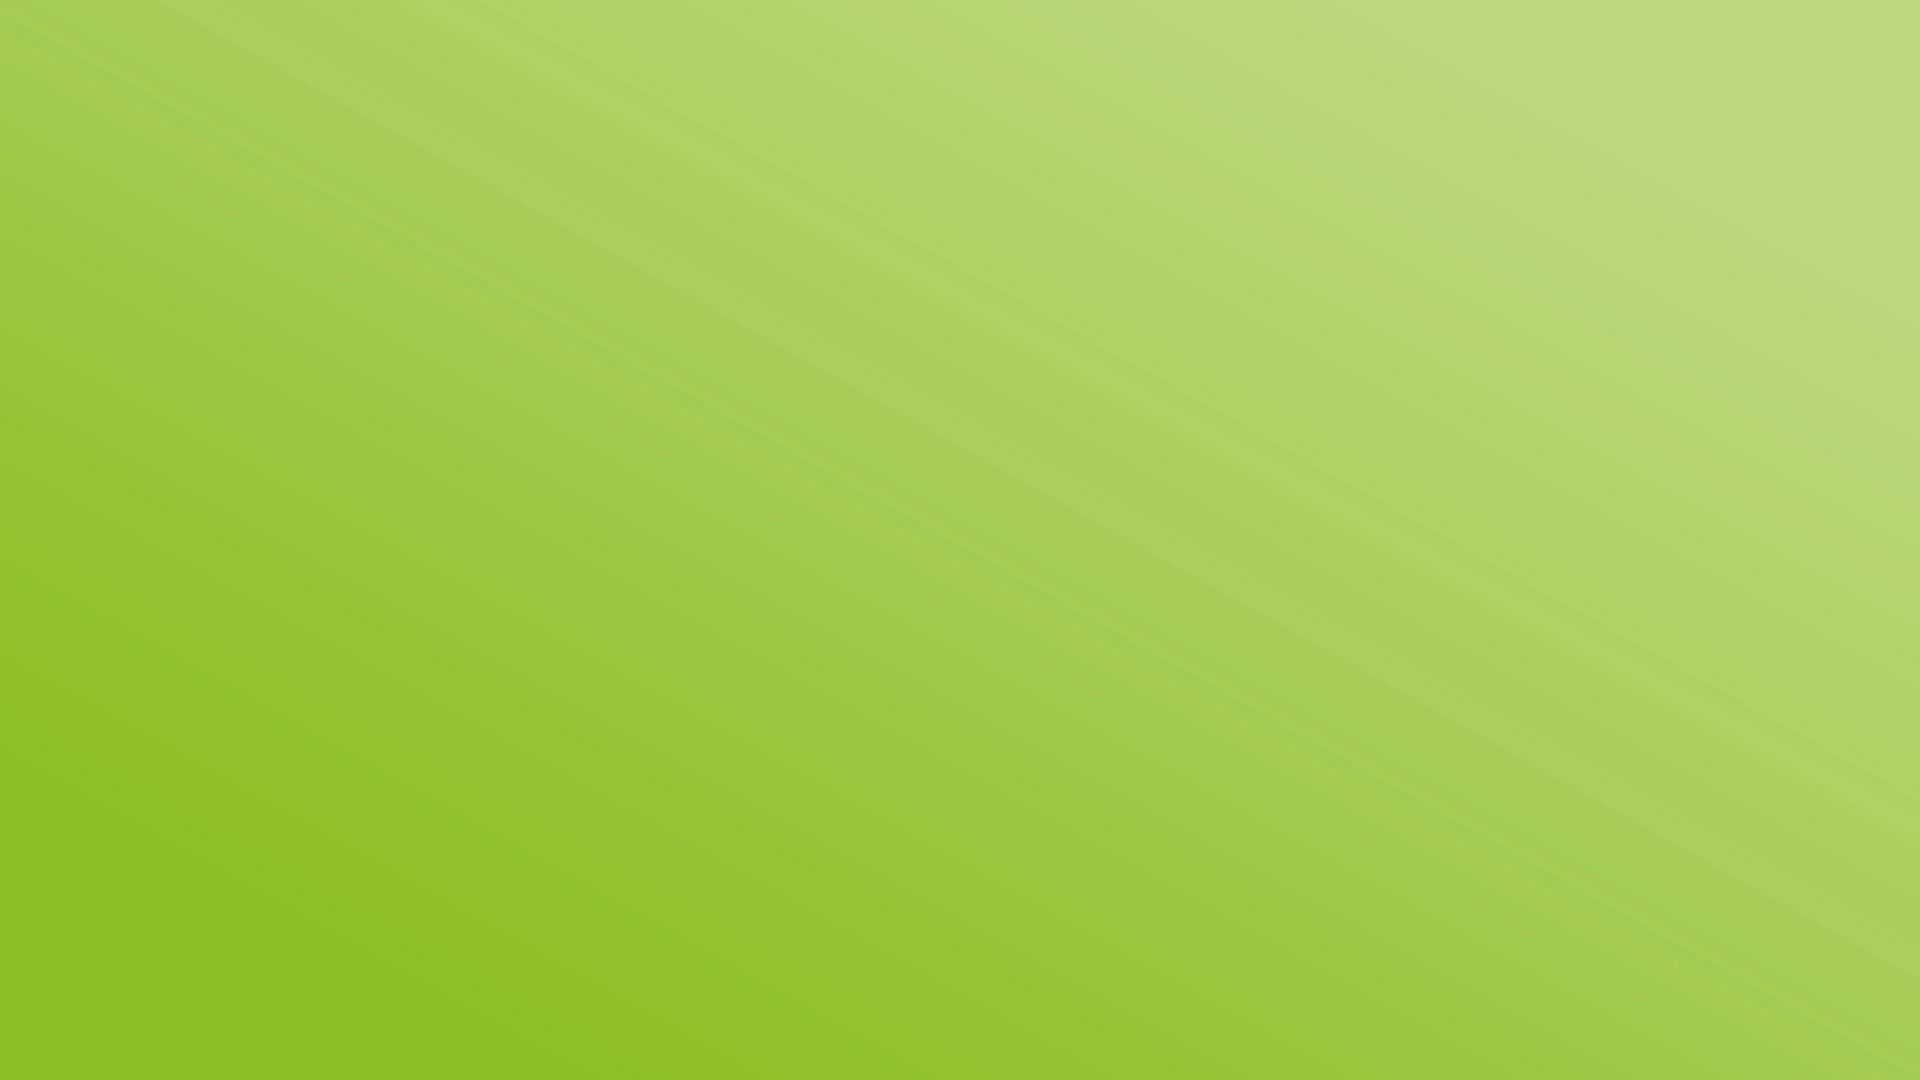 Download wallpaper 1920x1080 light green, solid, color full hd, hdtv, fhd,  1080p hd background